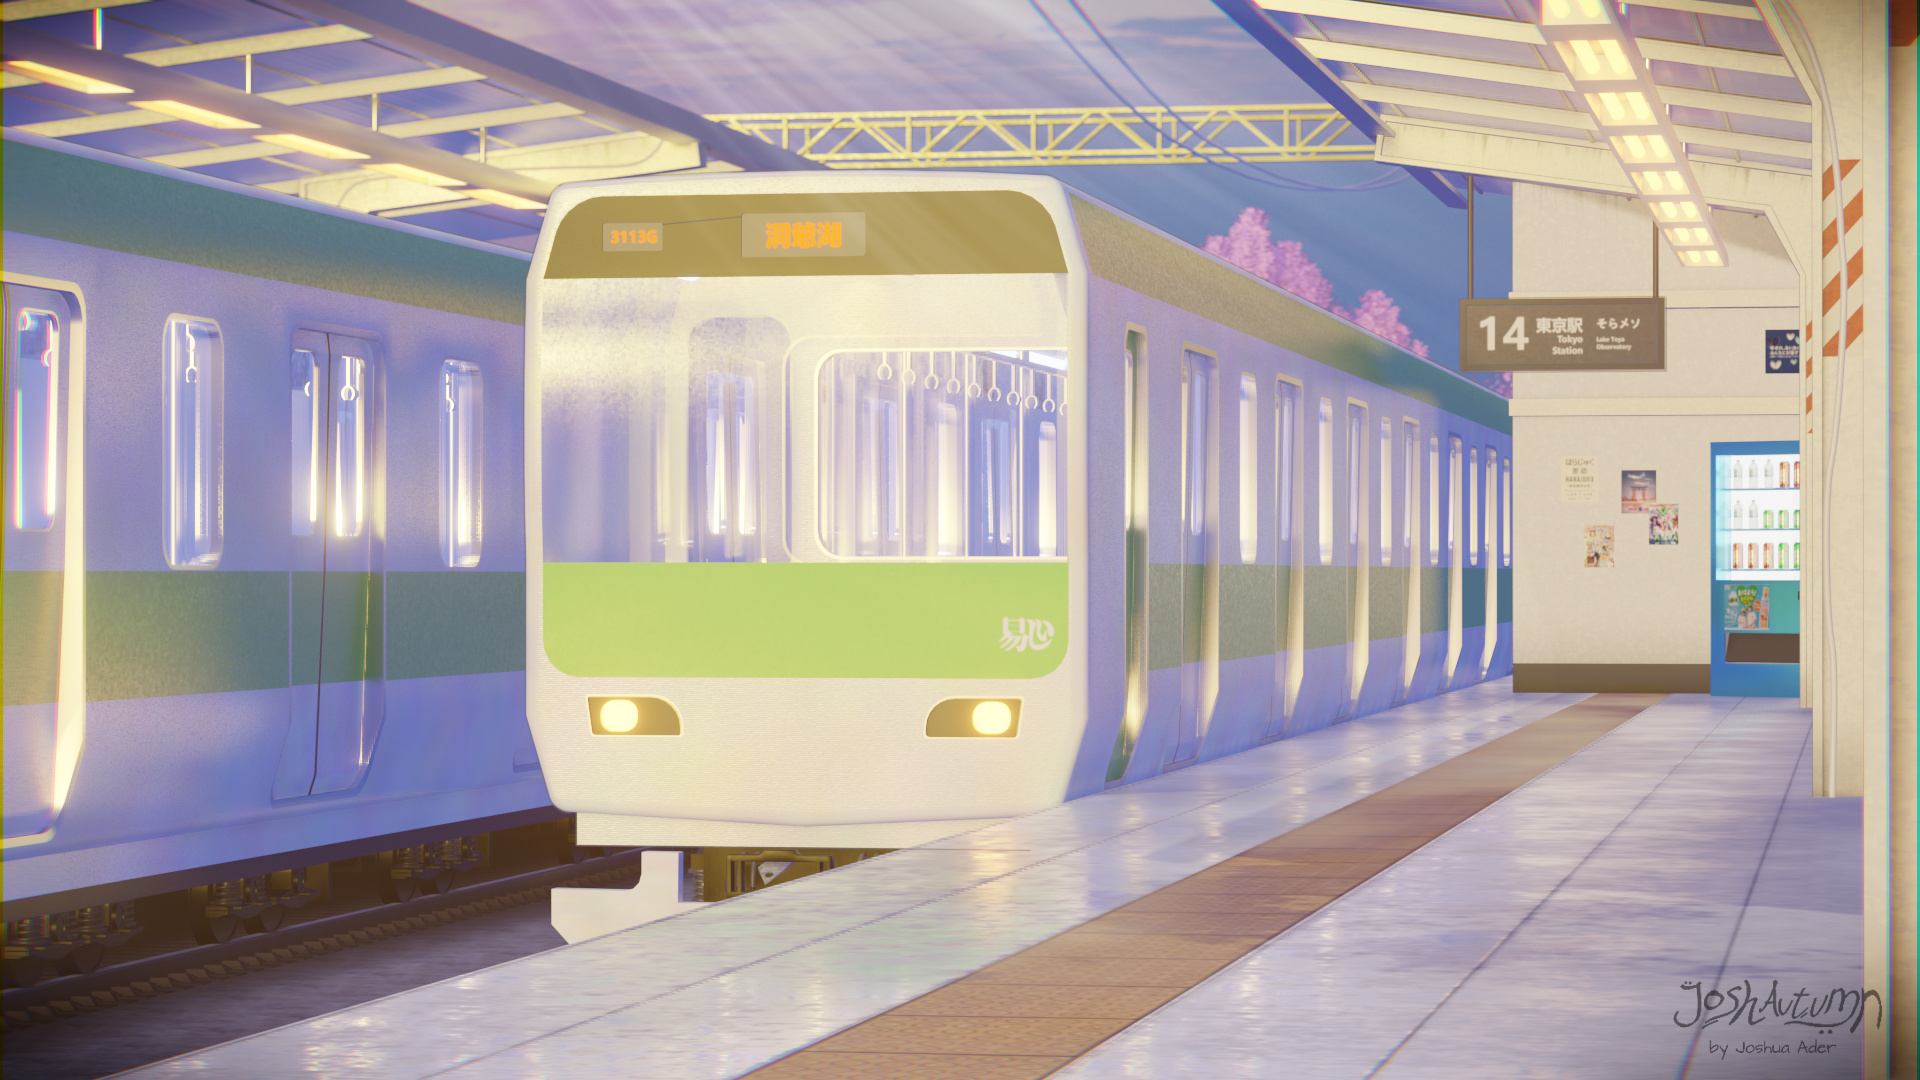 Train Station Cartoon Stock Photos and Images - 123RF